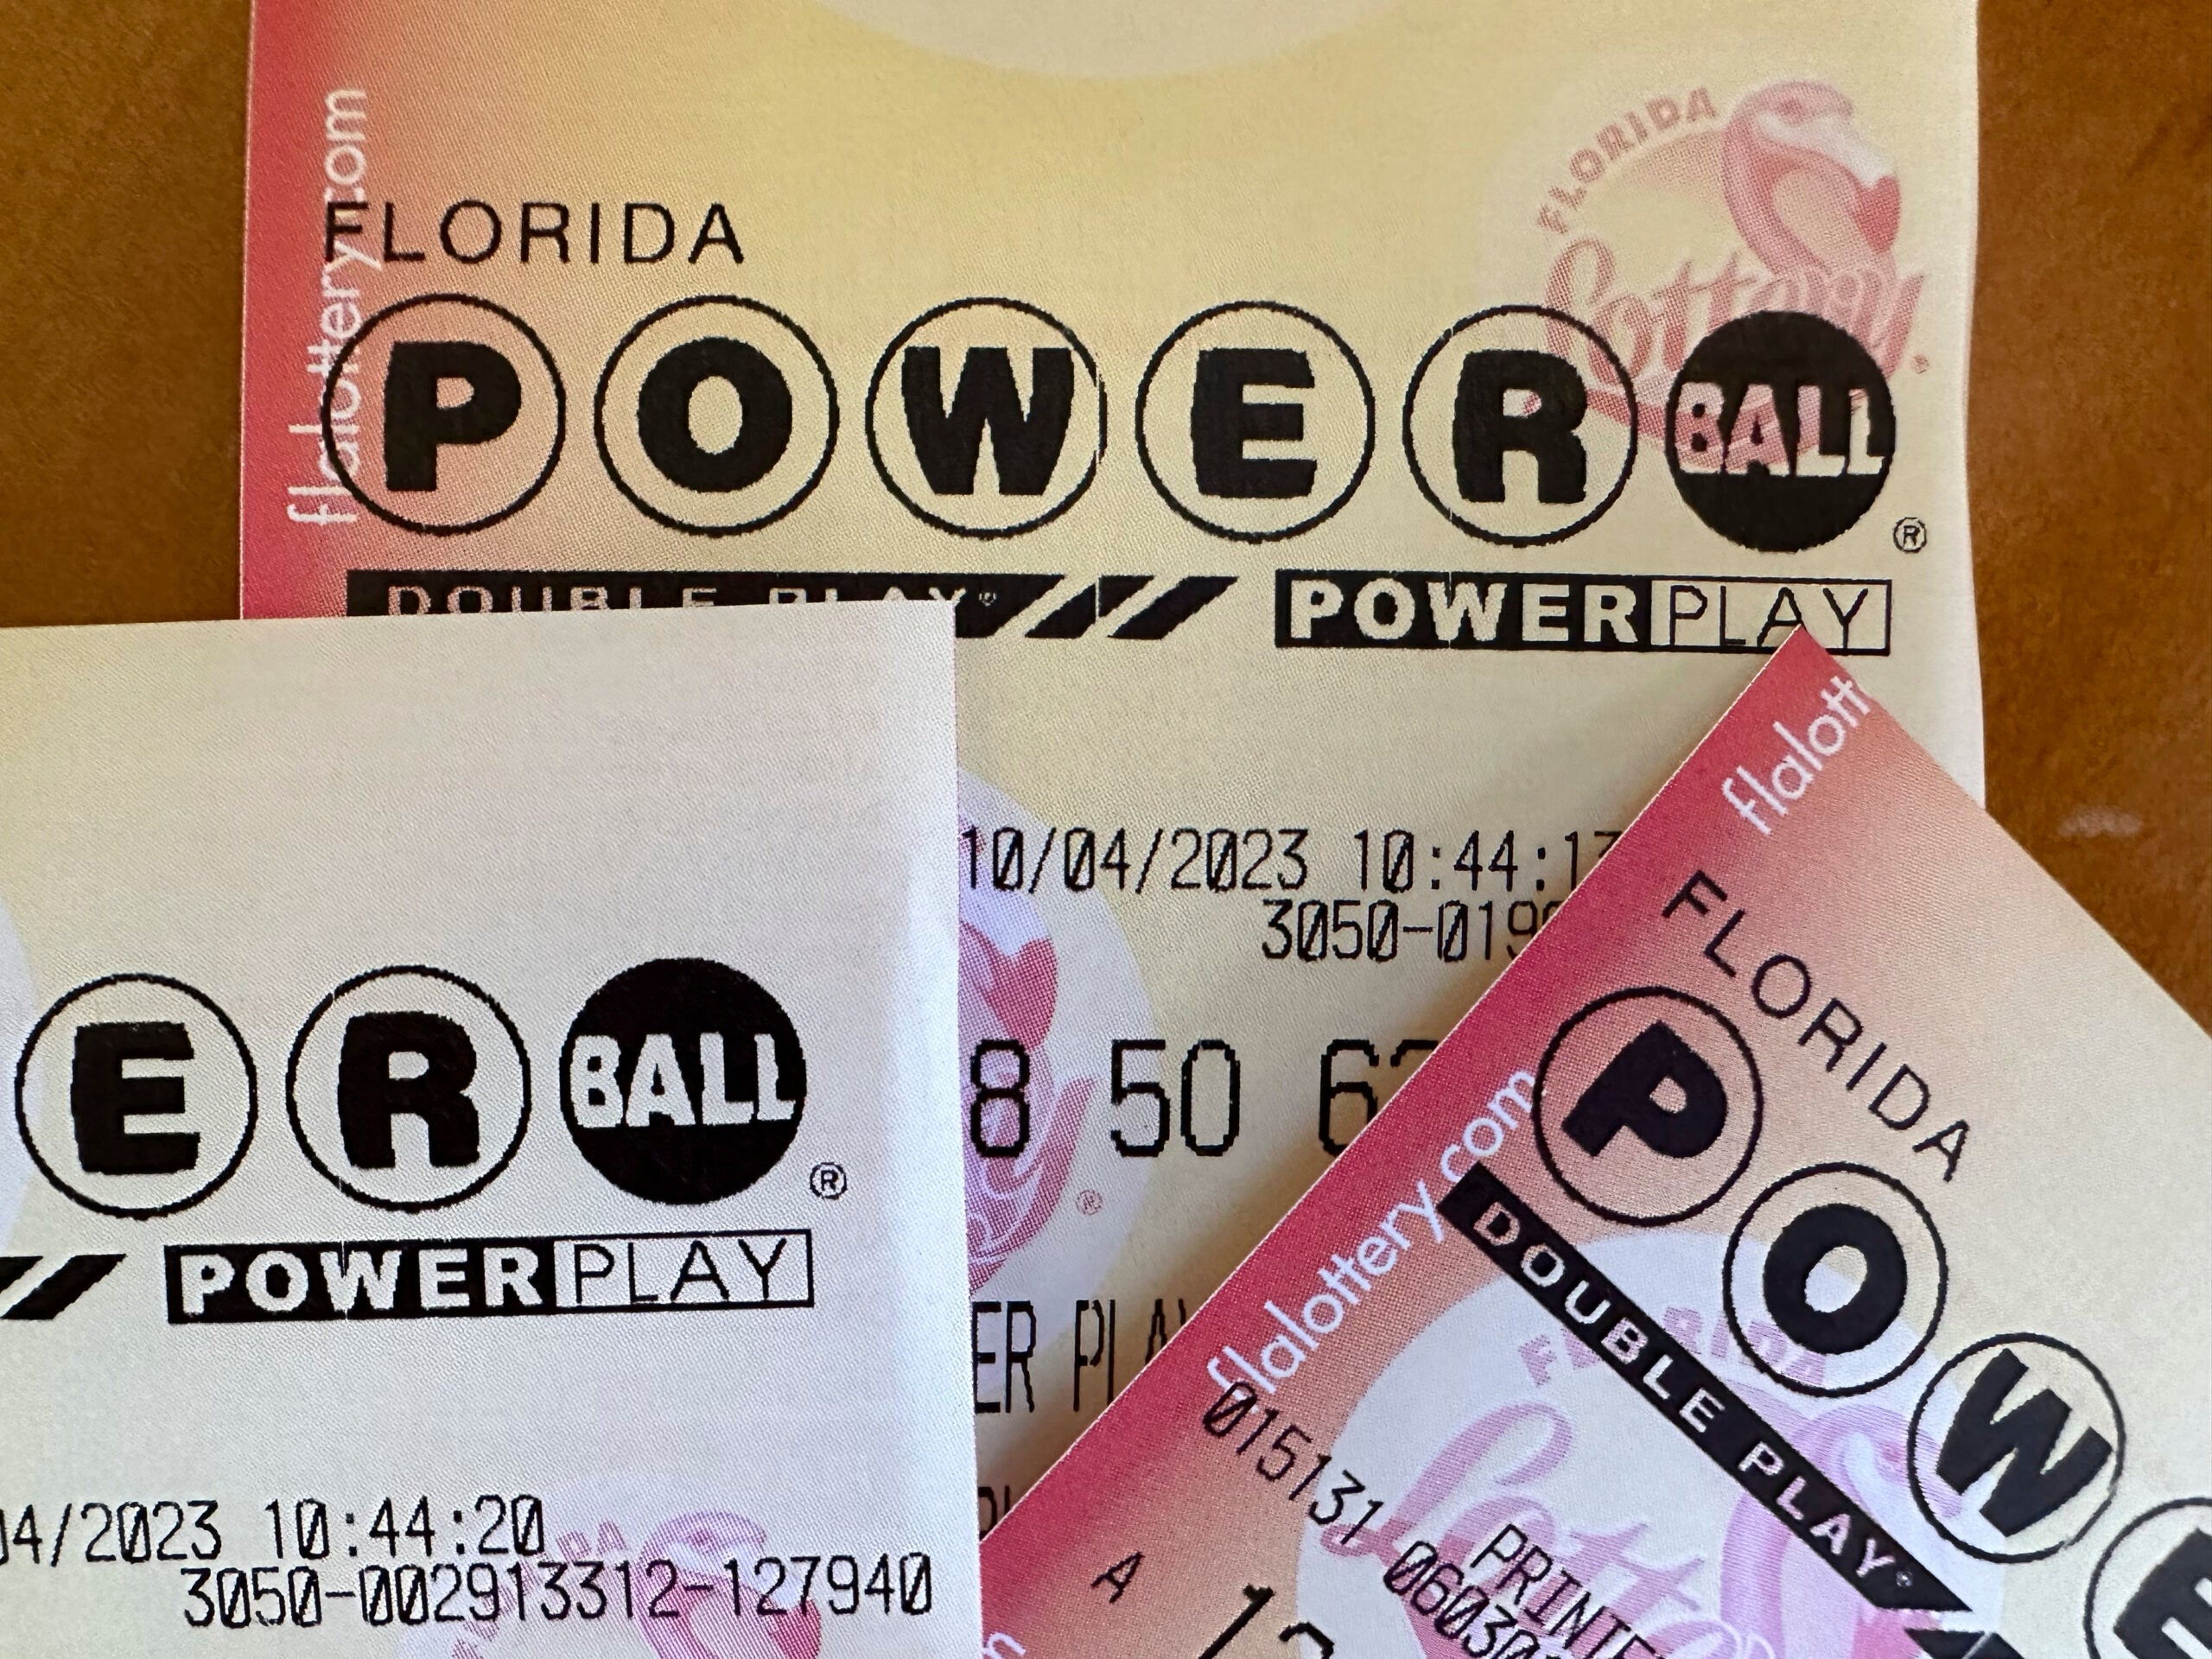 Powerball lottery tickets on display.